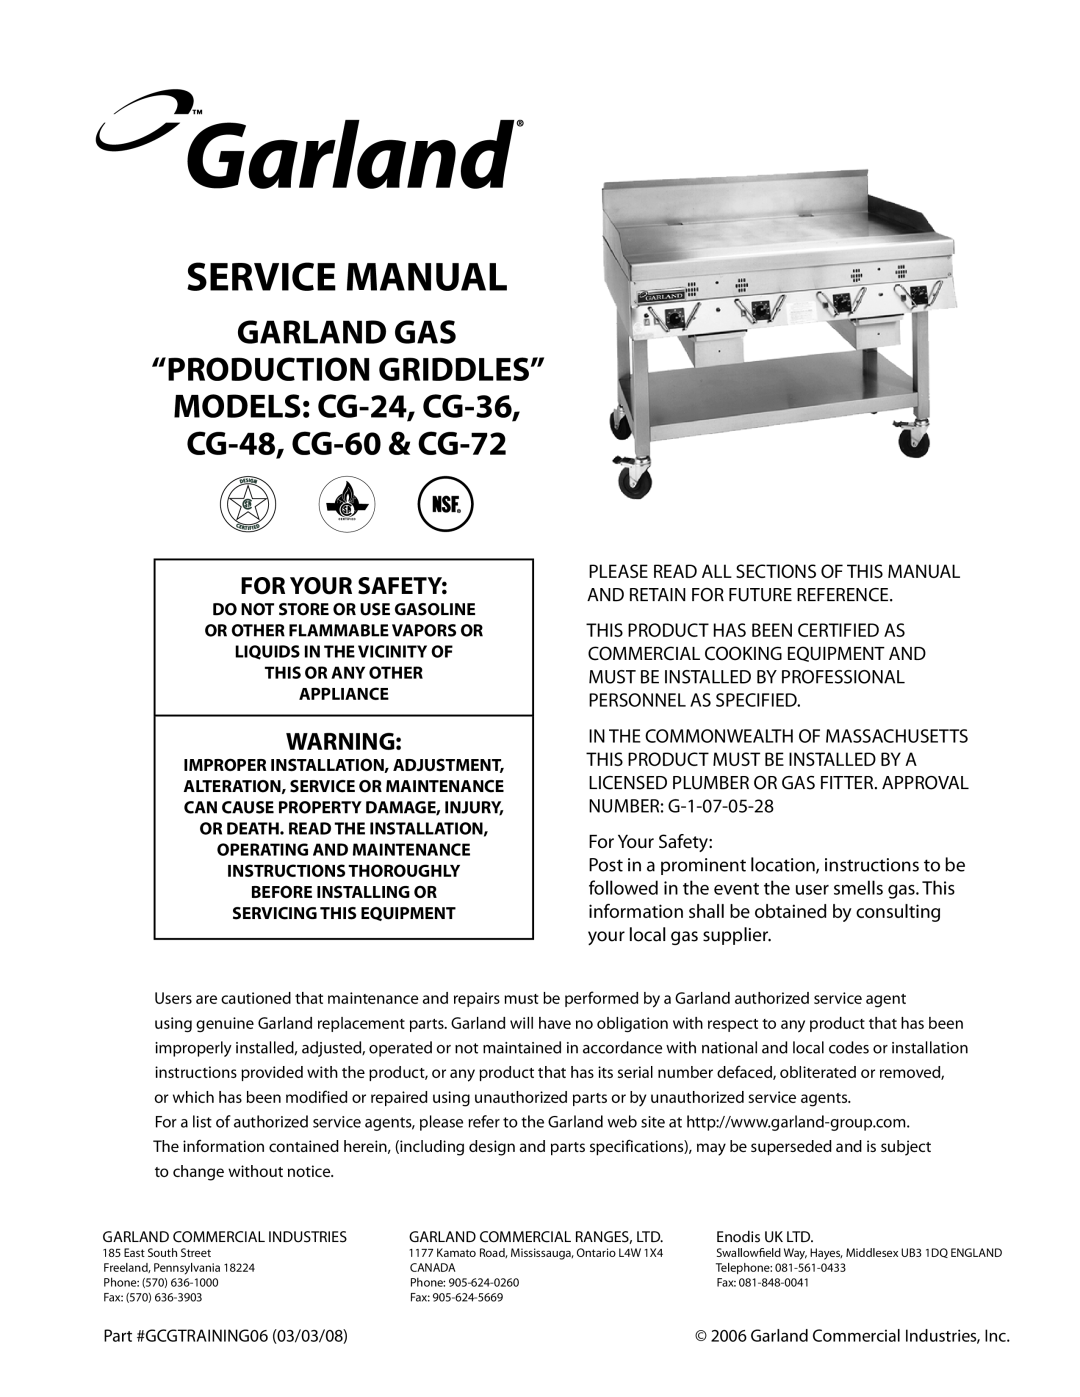 Garland CG-36, CG-24, CG-48, CG-72, CG-60 service manual Garland Gas, For Your Safety, This Or Any Other Appliance 